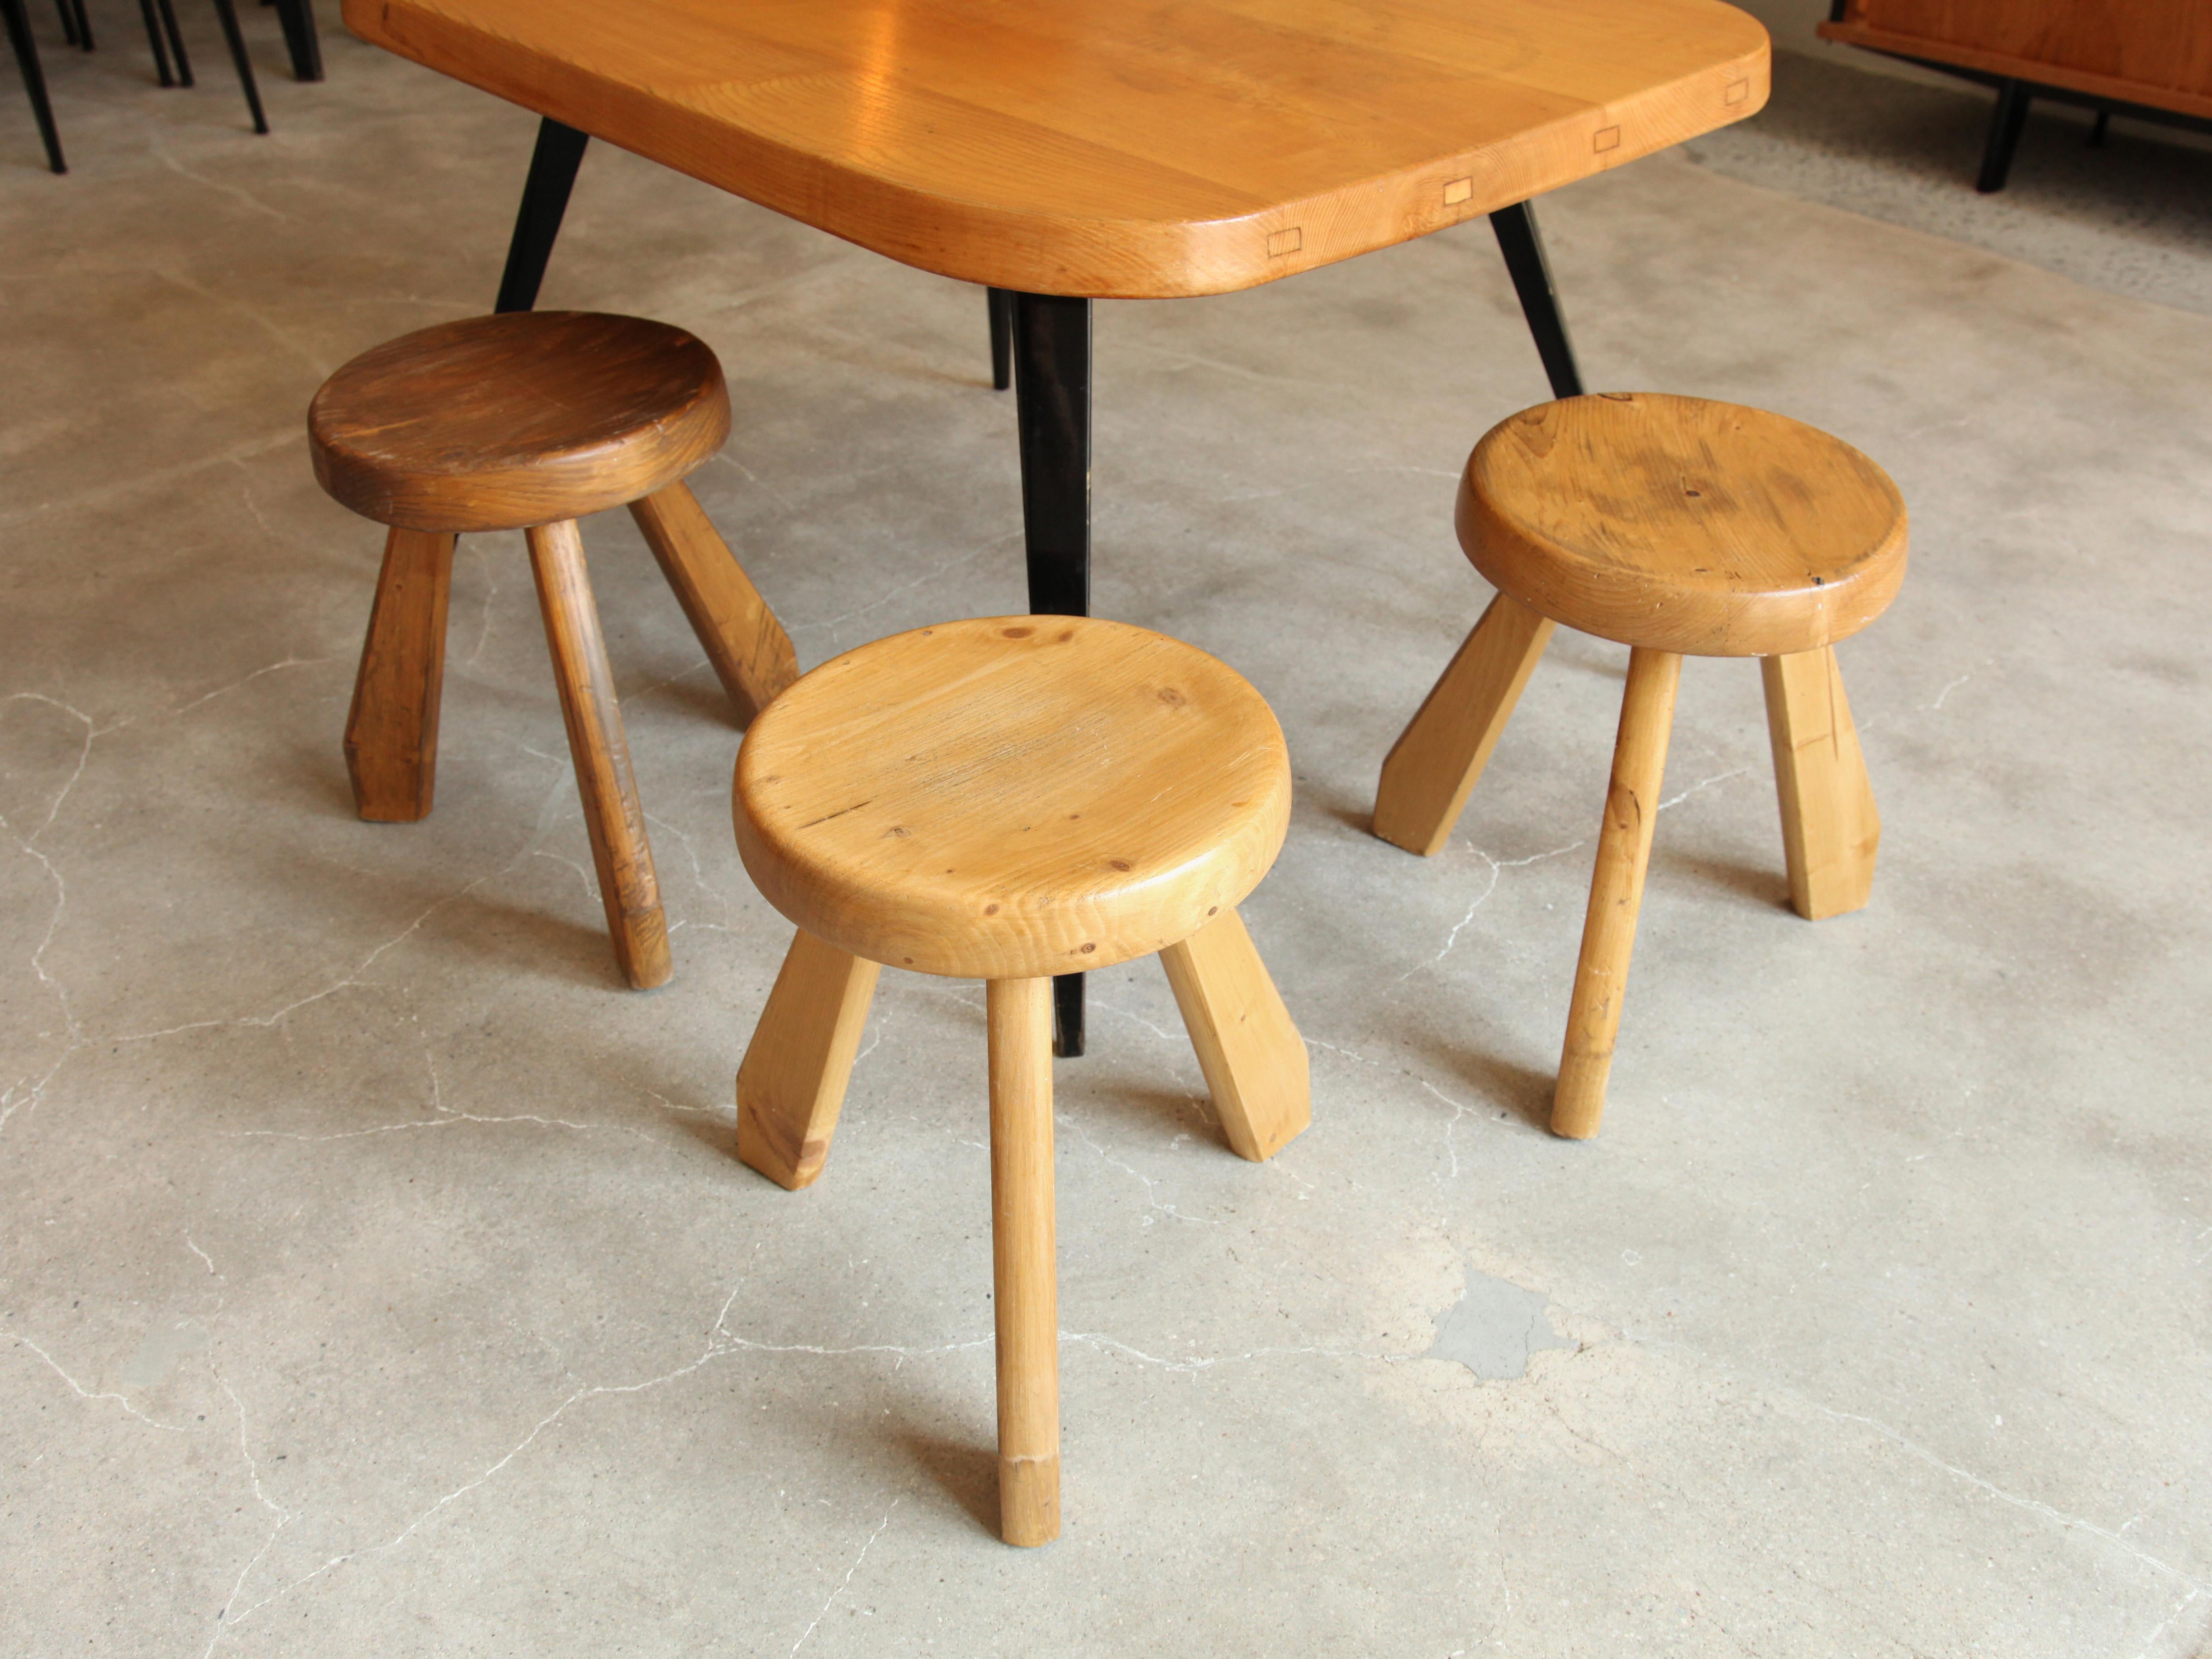 Mid-Century Modern Charlotte Perriand, Stools from Les Arcs, Savoie, circa 1968